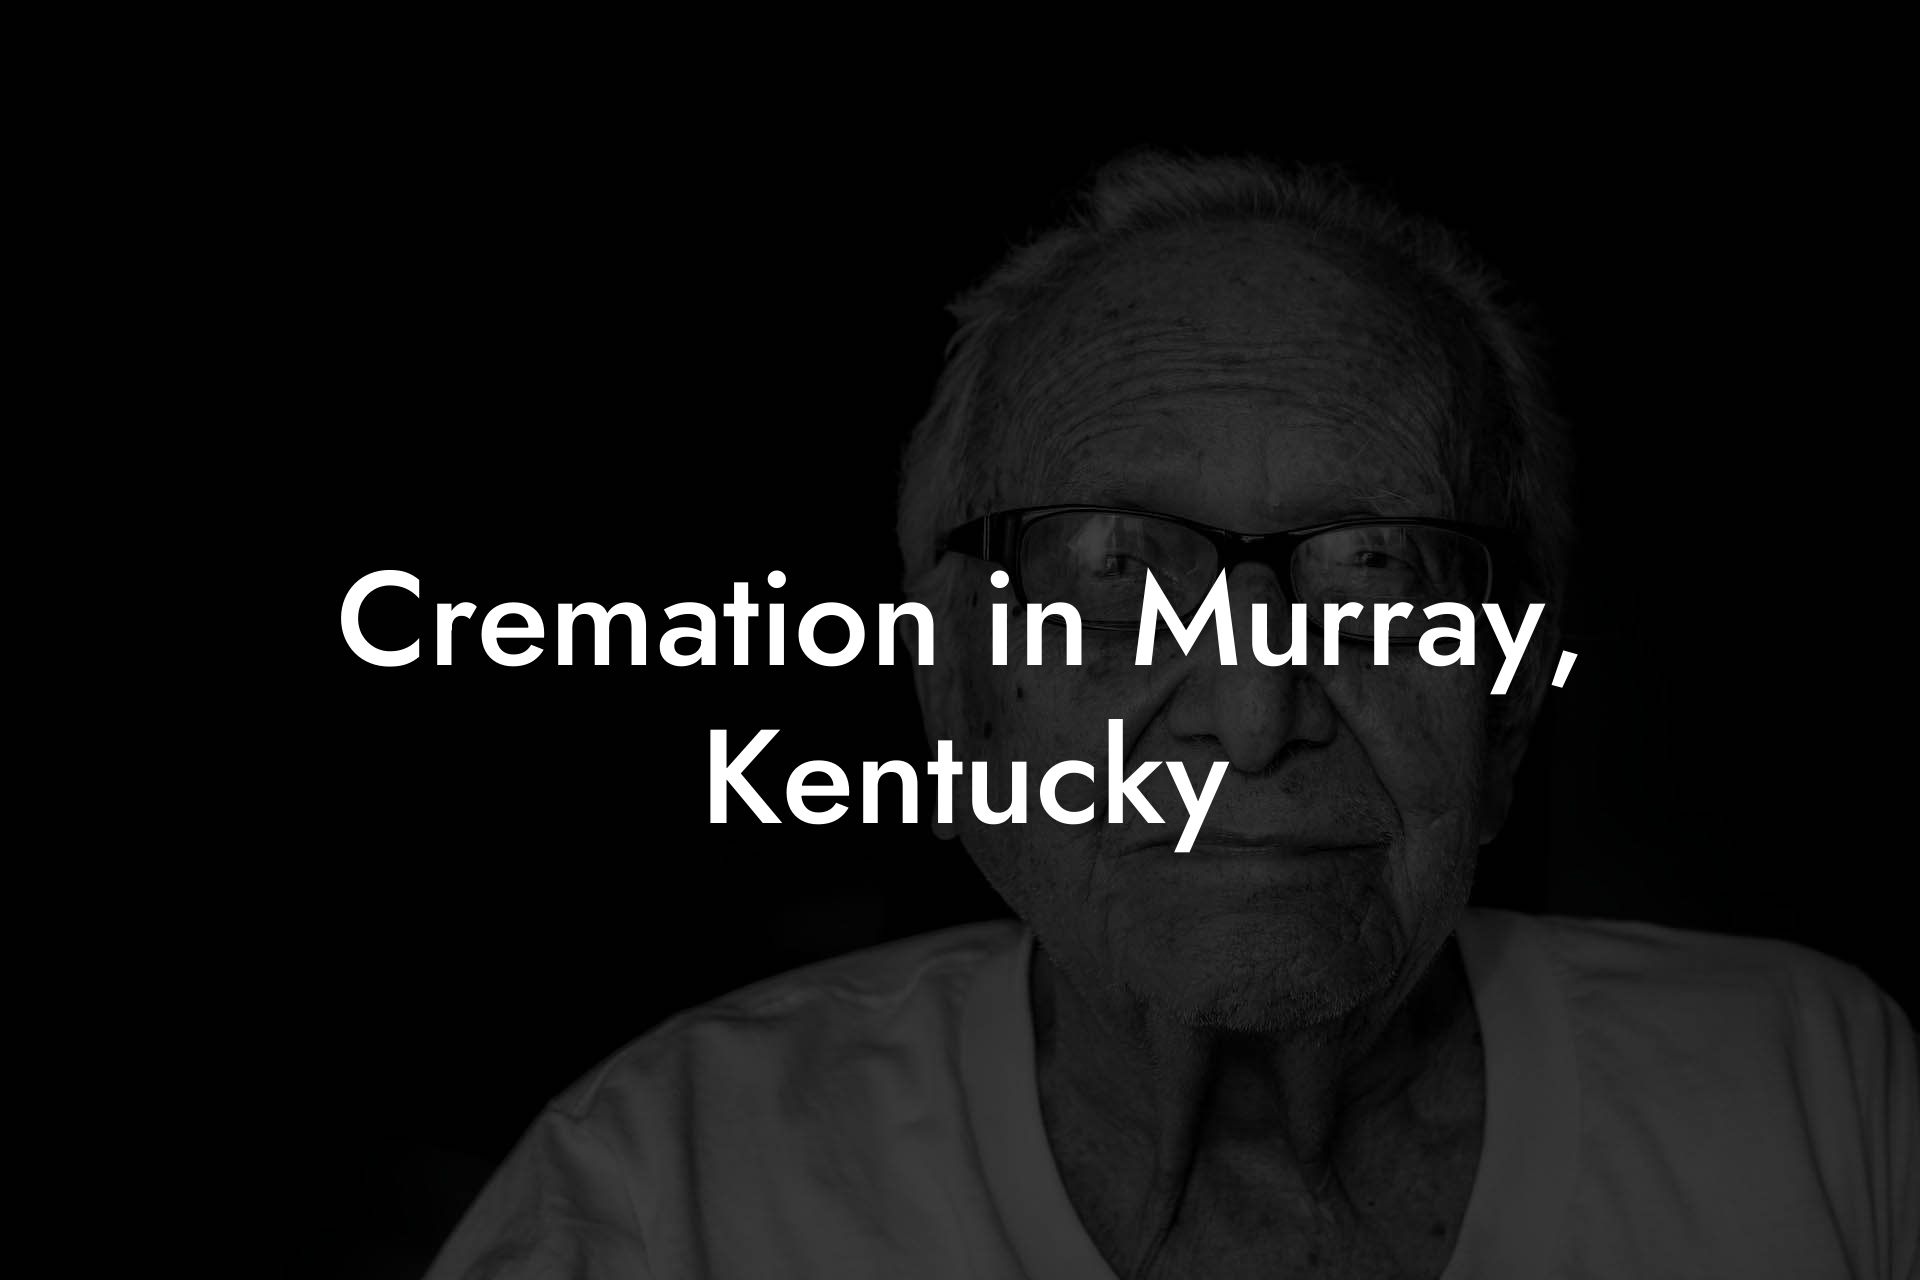 Cremation in Murray, Kentucky